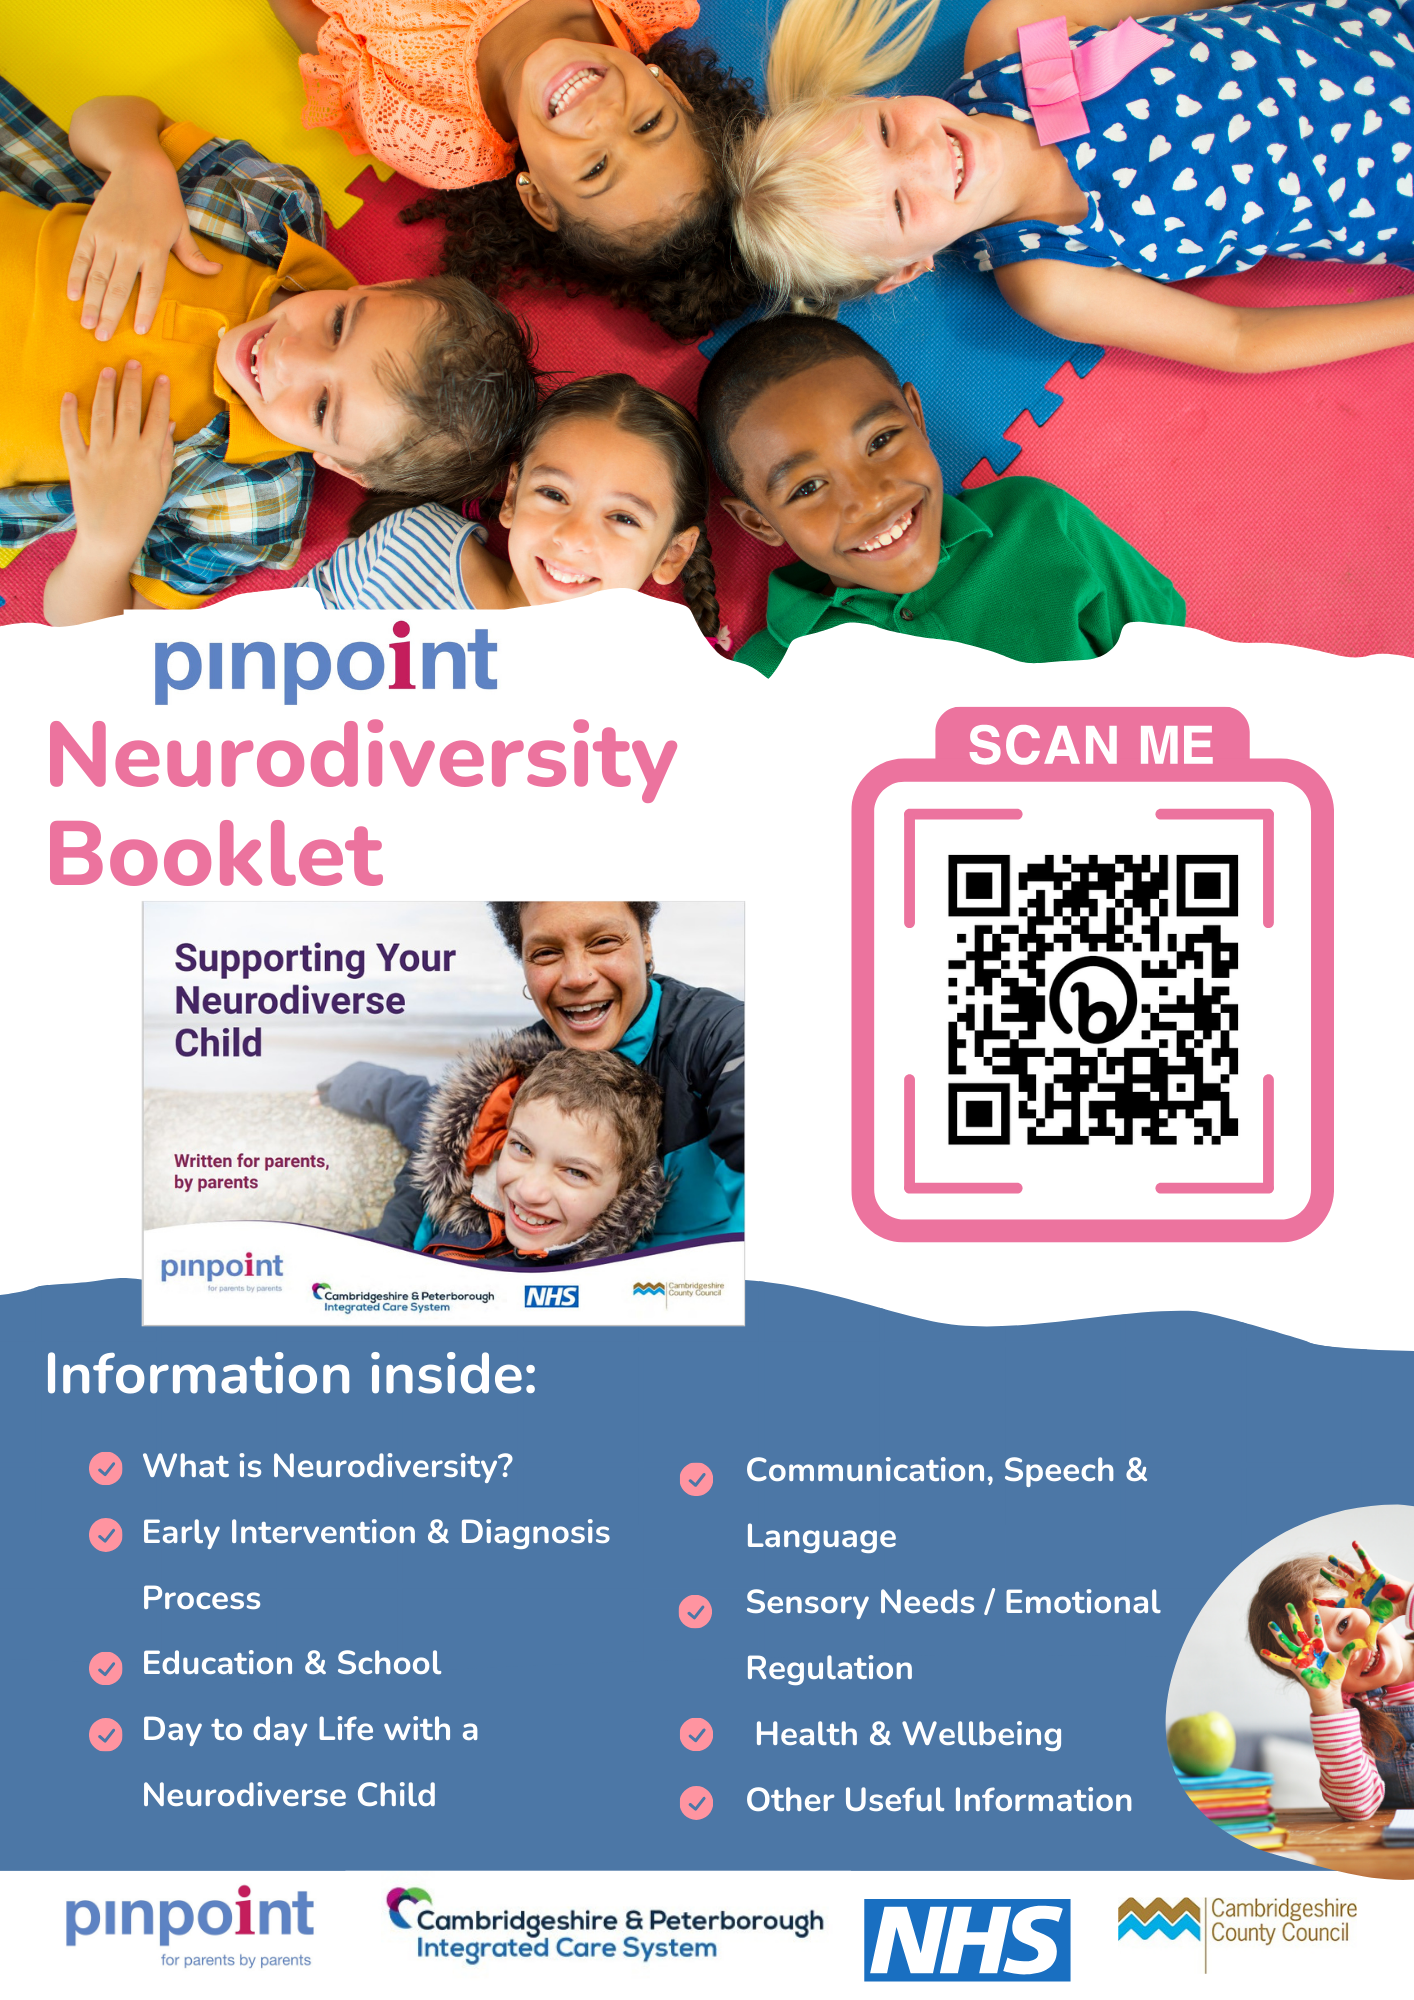 Image of Pinpoint Neurodiversity Booklet "Supporting your neurodiverse child". Information inside: What is Neurodiversity?, Early intervention & Diagnosis Process, Day to day life with a Neurodiverse child, Communication, Speech & Language, Sensory Needs/Emotional Regulation, Health & Wellbeing, Other Useful information. Pinpoint logo, Cambridgeshire and Peterborough Integrated Care System logo, NHS logo, Cambridgeshire County Council logo.